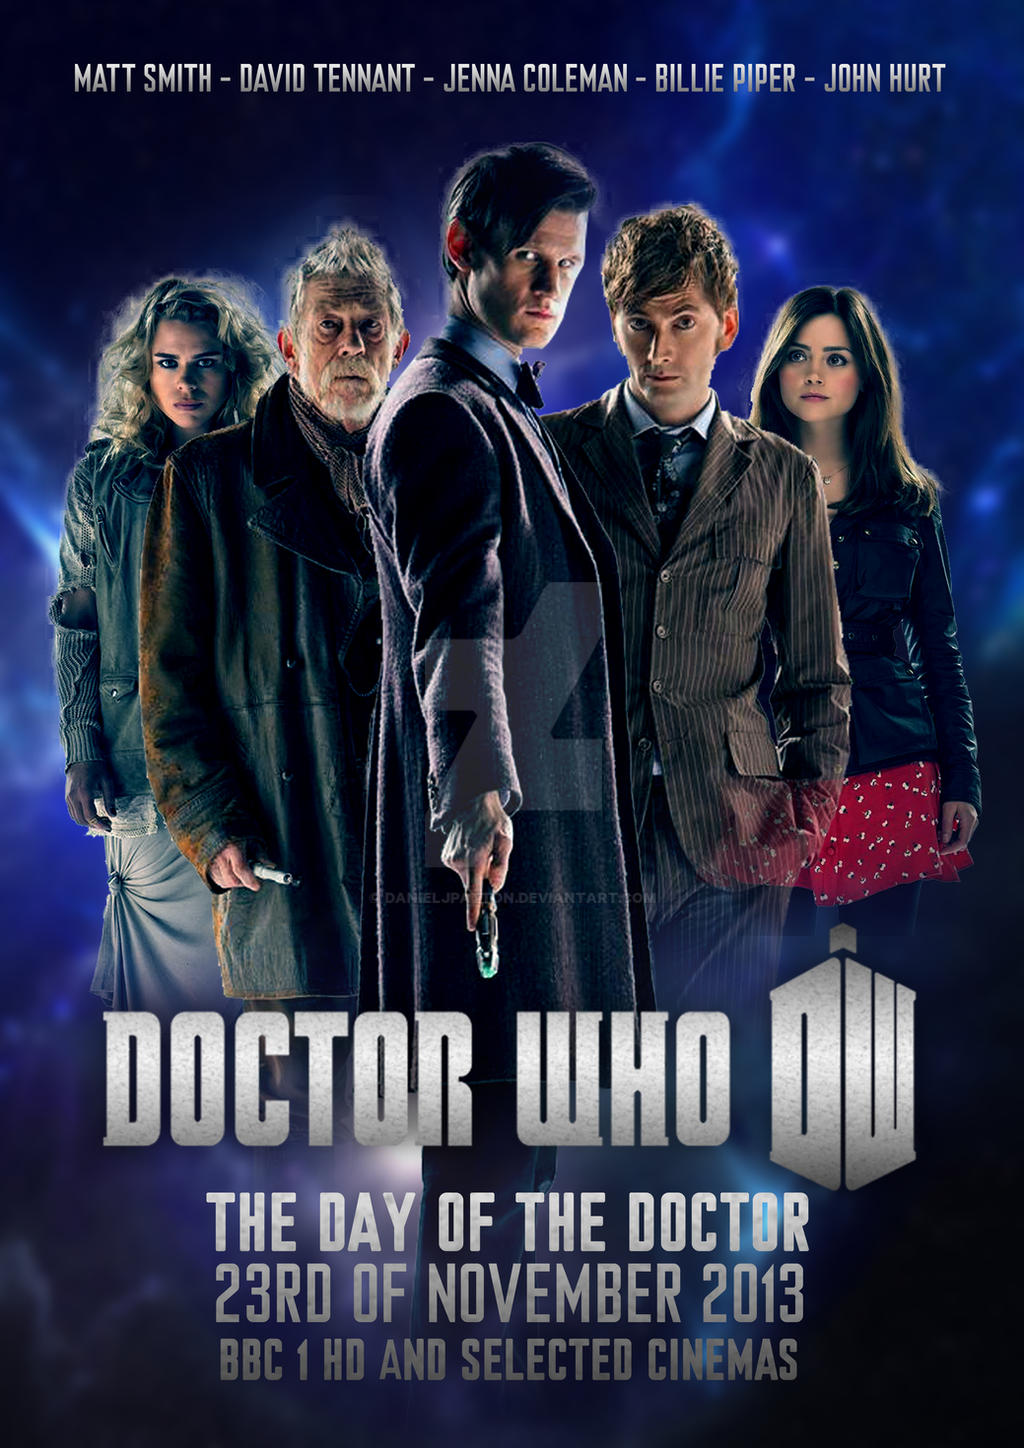 Doctor Who - the Day of the Doctor - Poster #2 by DanielJPatton on